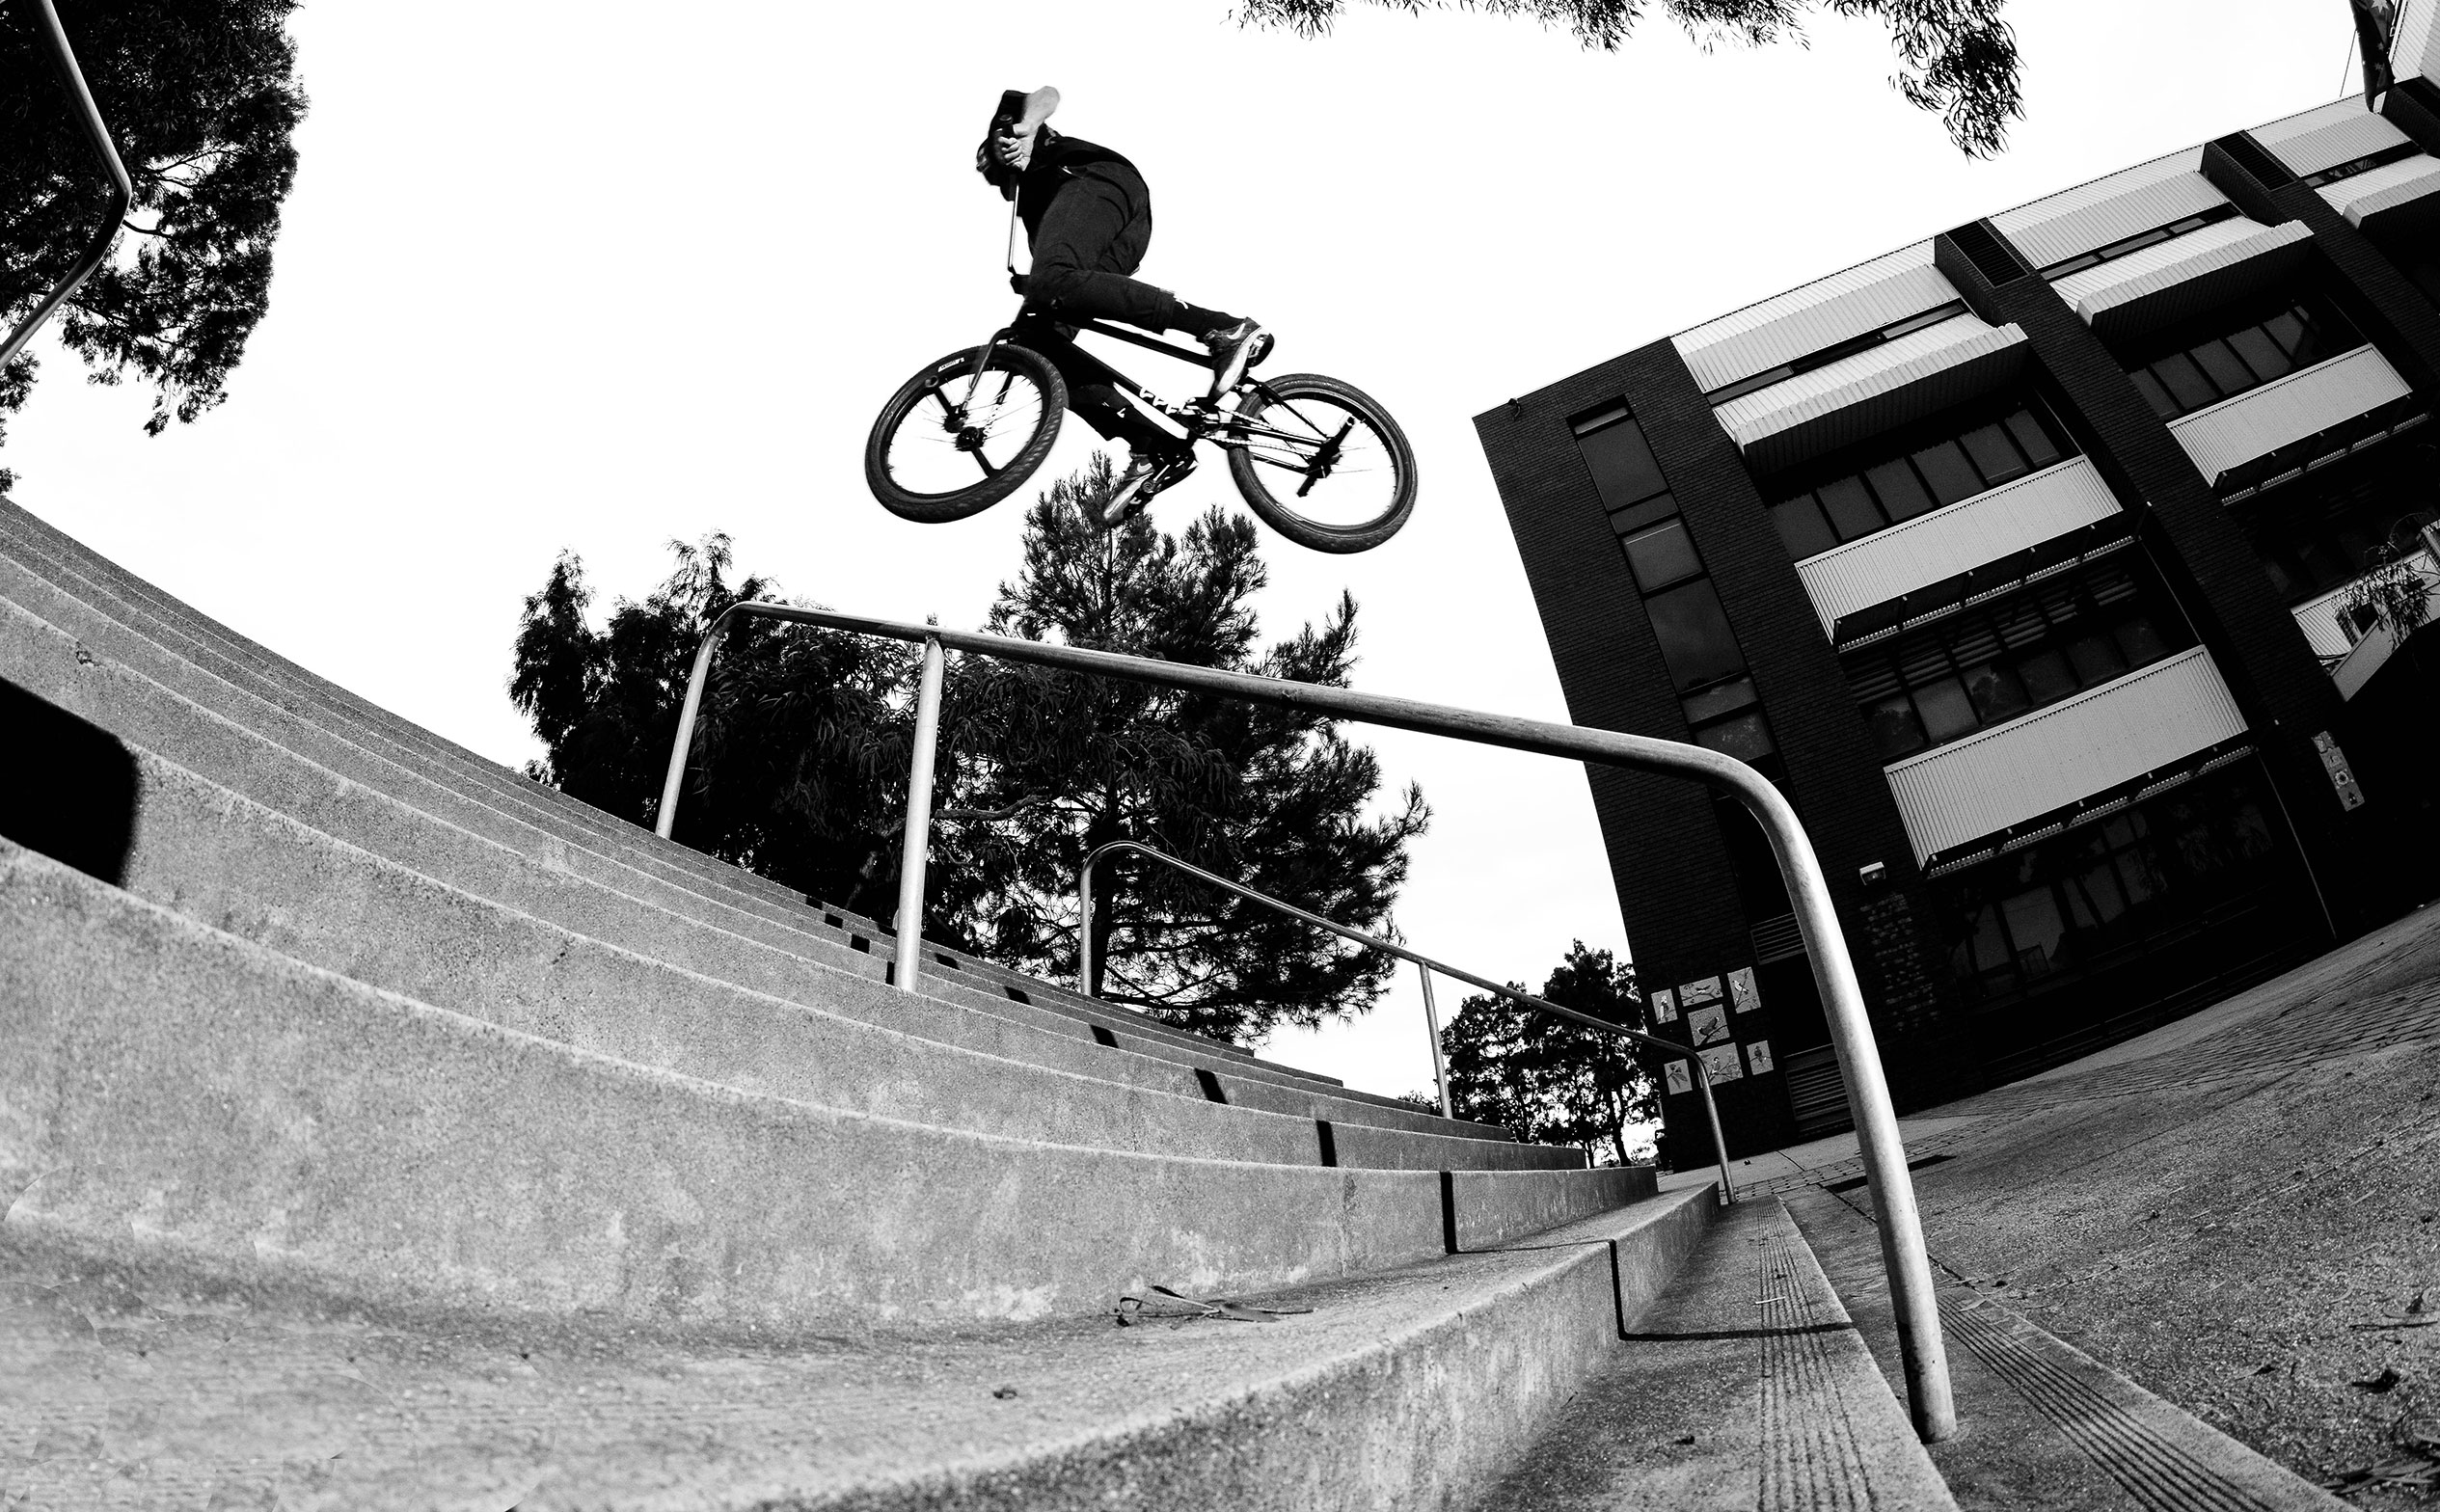 As seen in the new Package video. Matt Green with a hefty 360 over the rail.